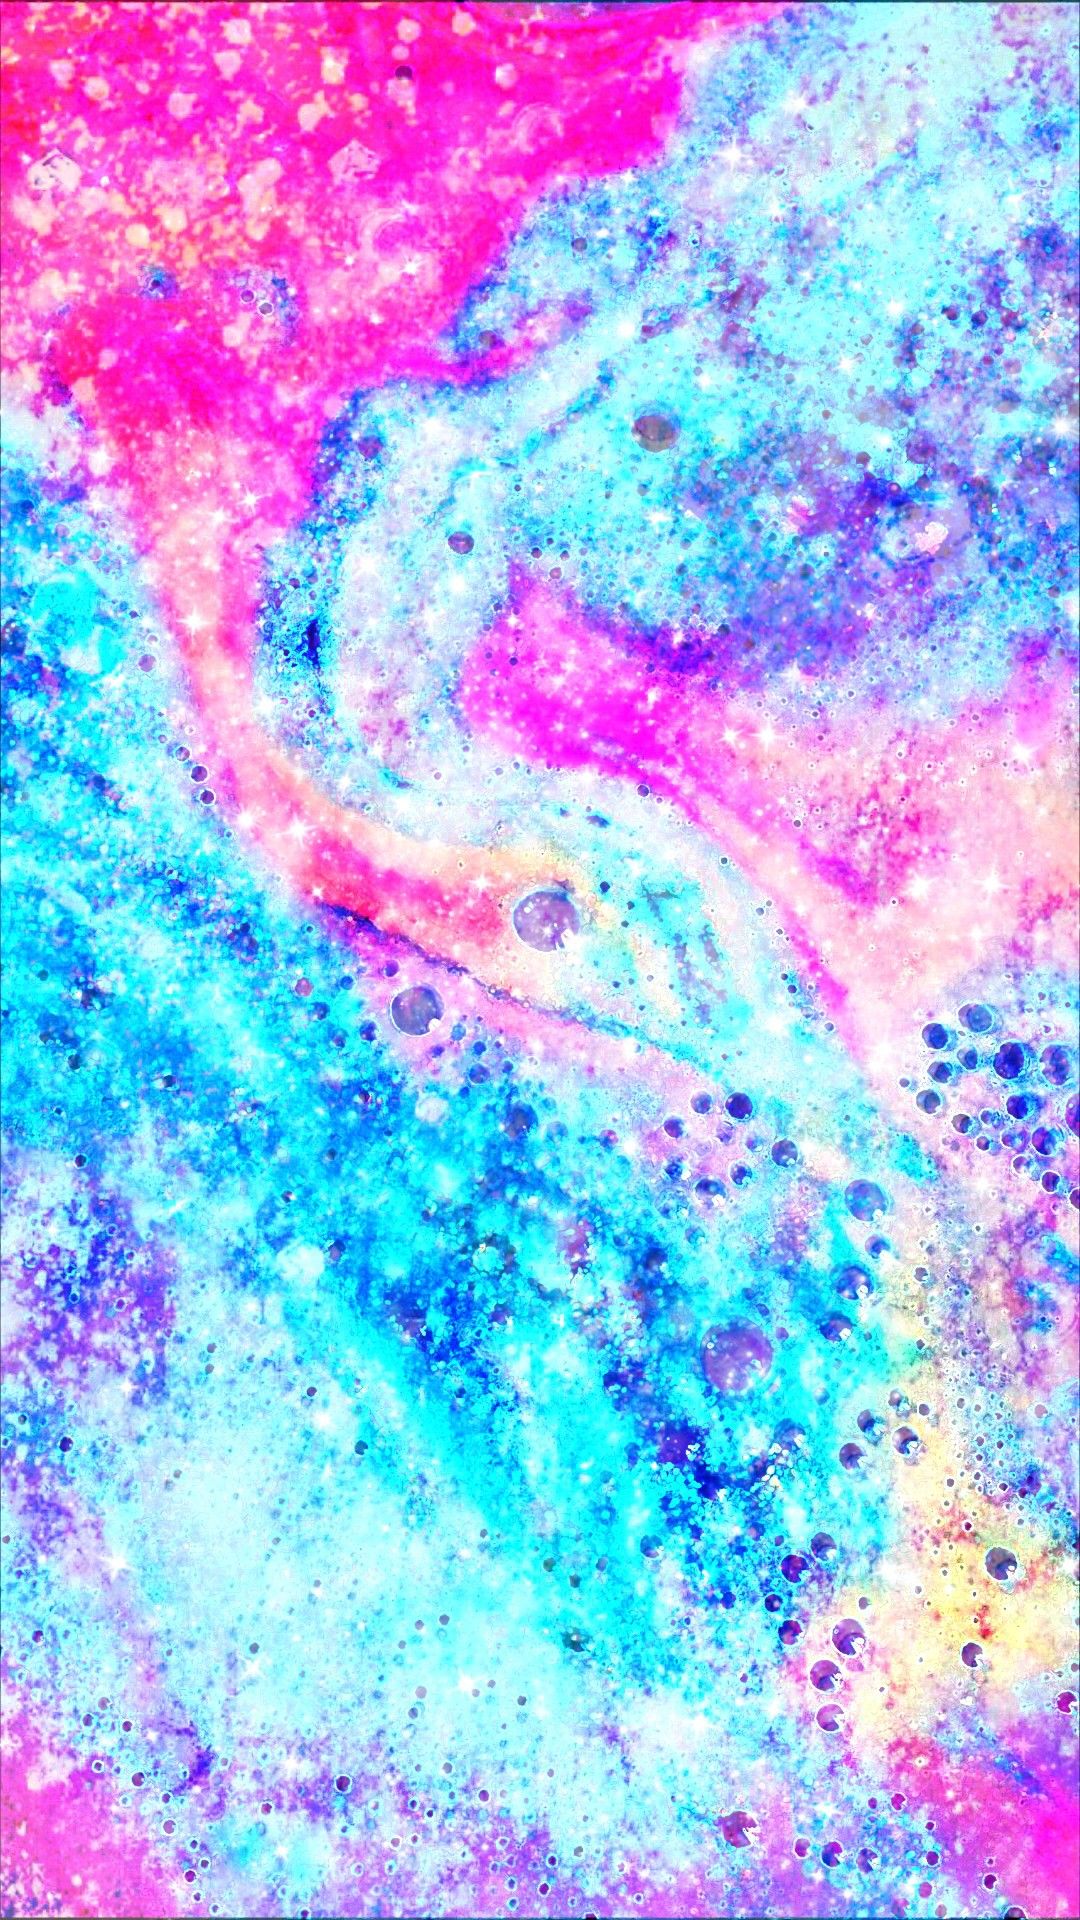 Colorful Galaxy Bath Bomb, Made By Me - Lush Bath Bomb Background , HD Wallpaper & Backgrounds